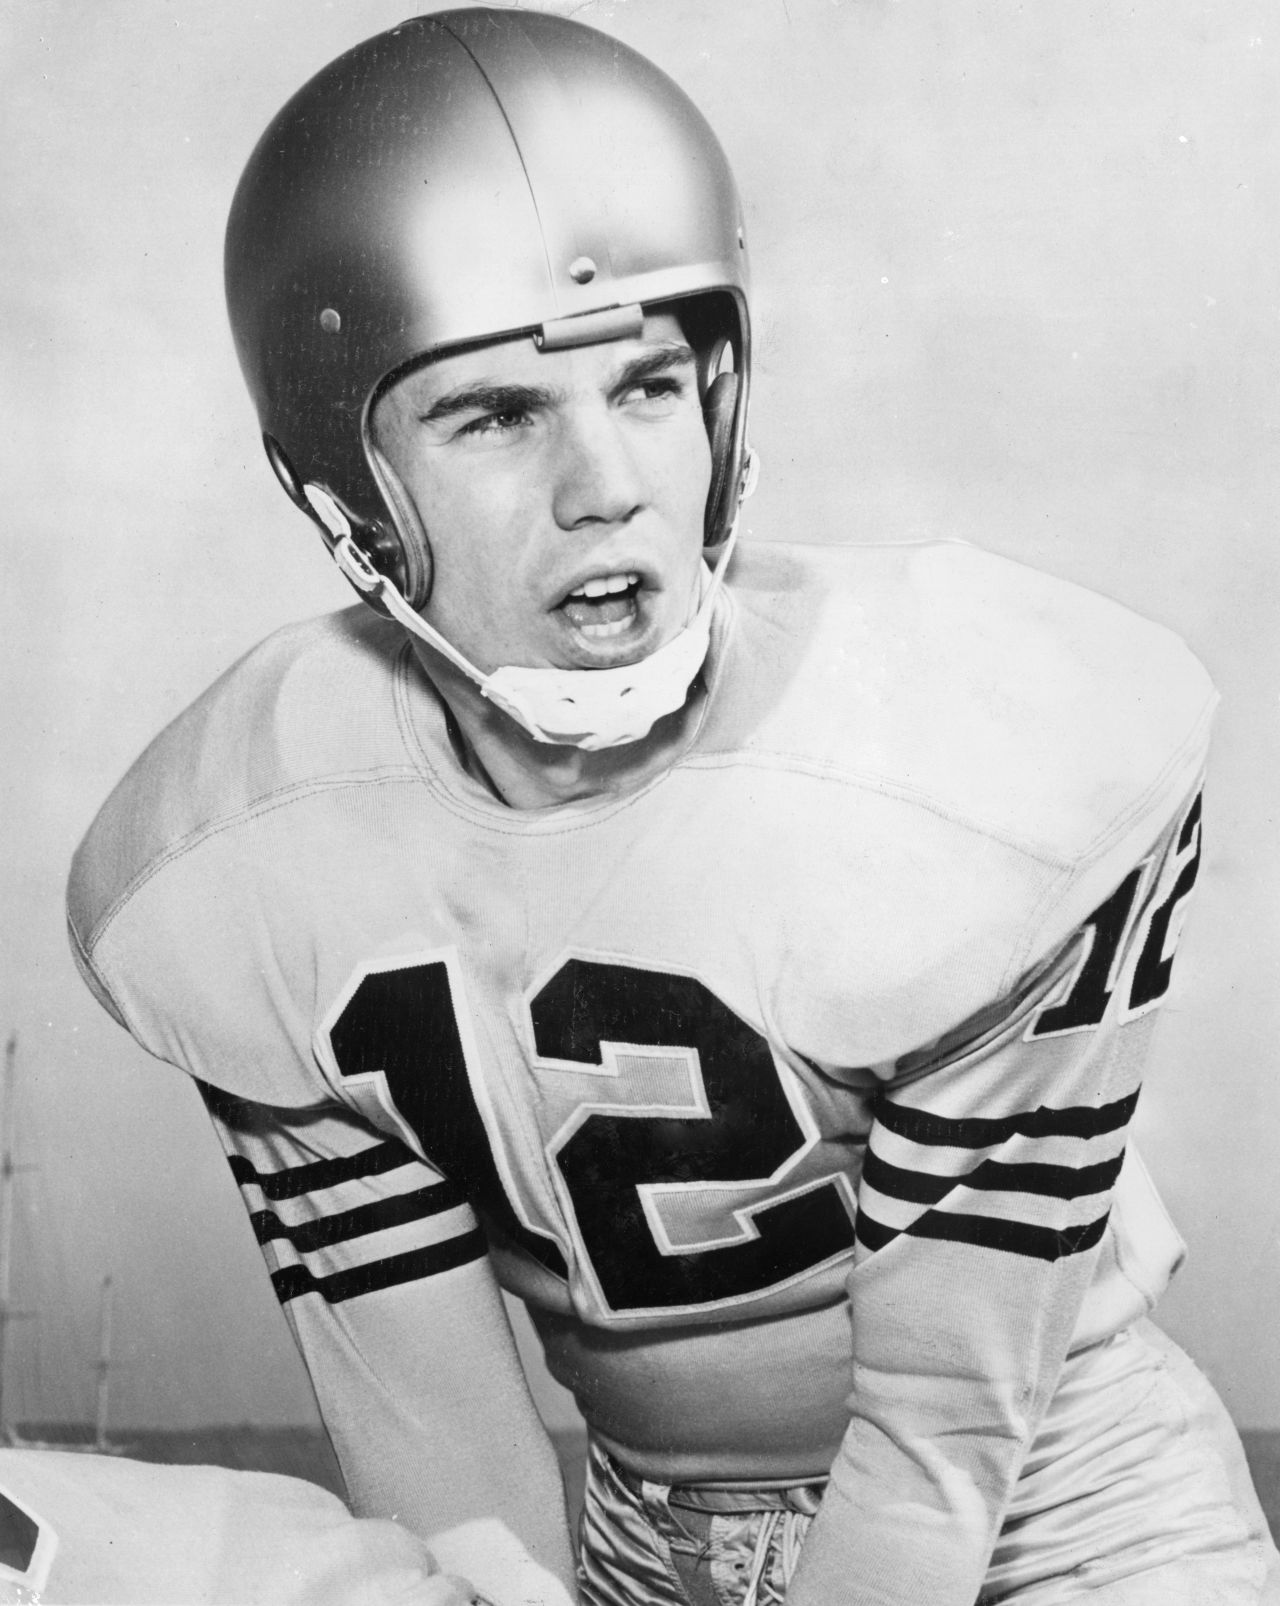 Fleet-footed quarterback Roger Staubach wore No. 12 throughout his college and pro career with Navy and the Dallas Cowboys. A slippery fellow who earned the sobriquet "Roger the Dodger," Staubach rushed for 2,264 yards and 20 touchdowns on top of his 153 passing touchdowns. The Heisman Trophy winner was drafted late in 1964 but went on to earn six Pro Bowl selections and win two Super Bowls, despite a four-year stint in the military that kept him out of the league until age 27. The NFL ranks him the 46th best player of all time. 